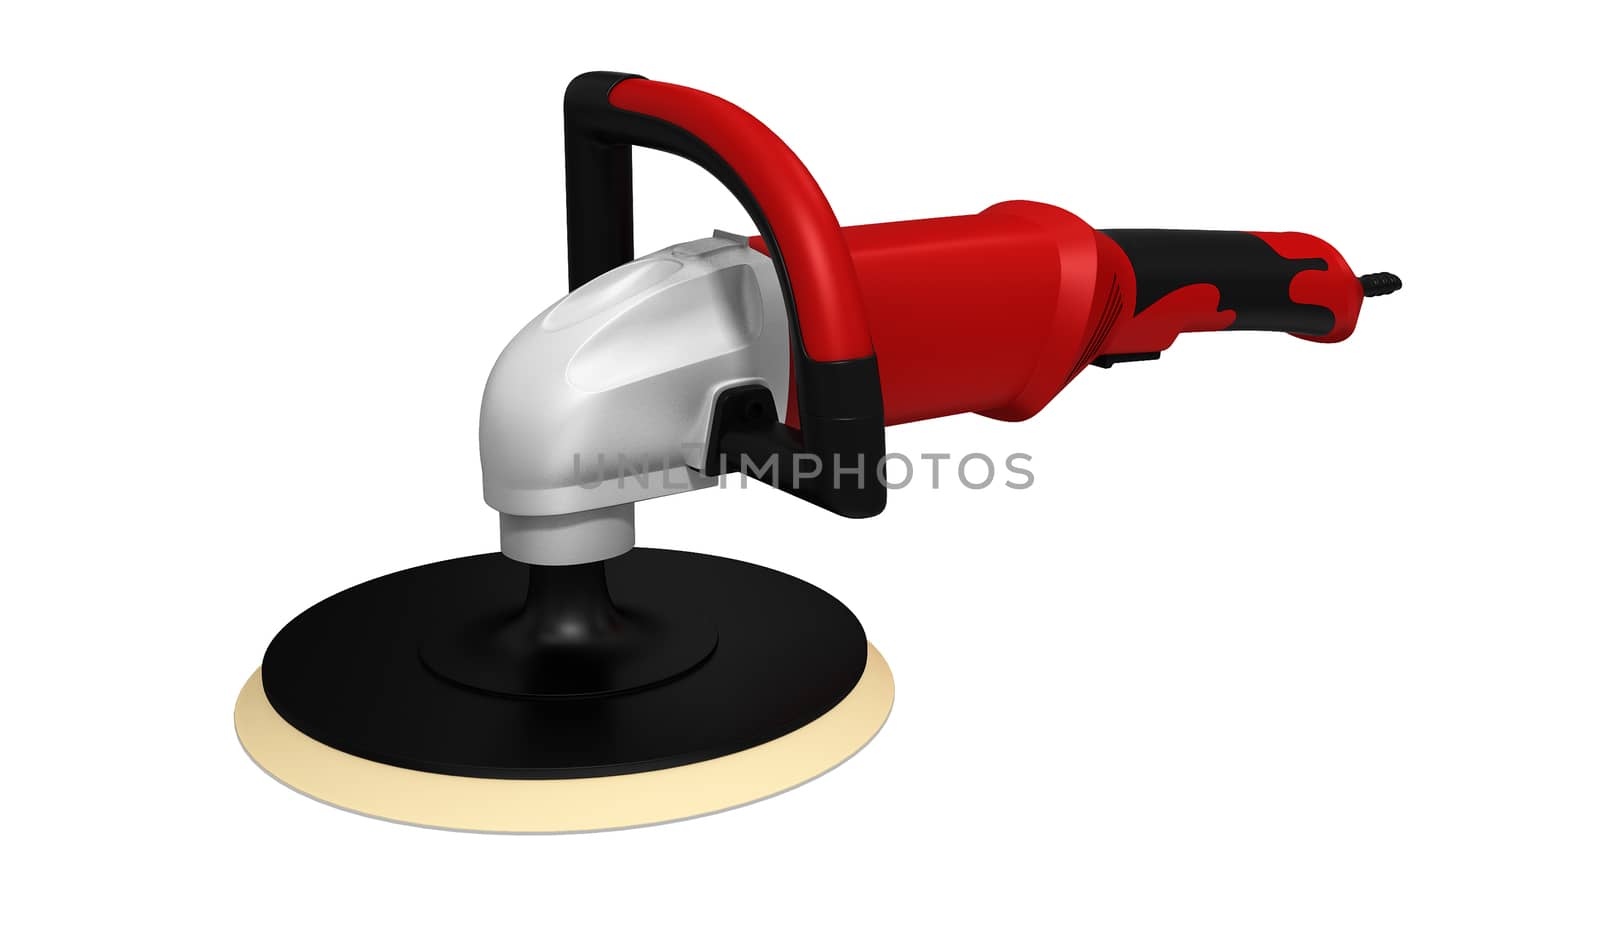 The grinding car and abrasive disk on a white background